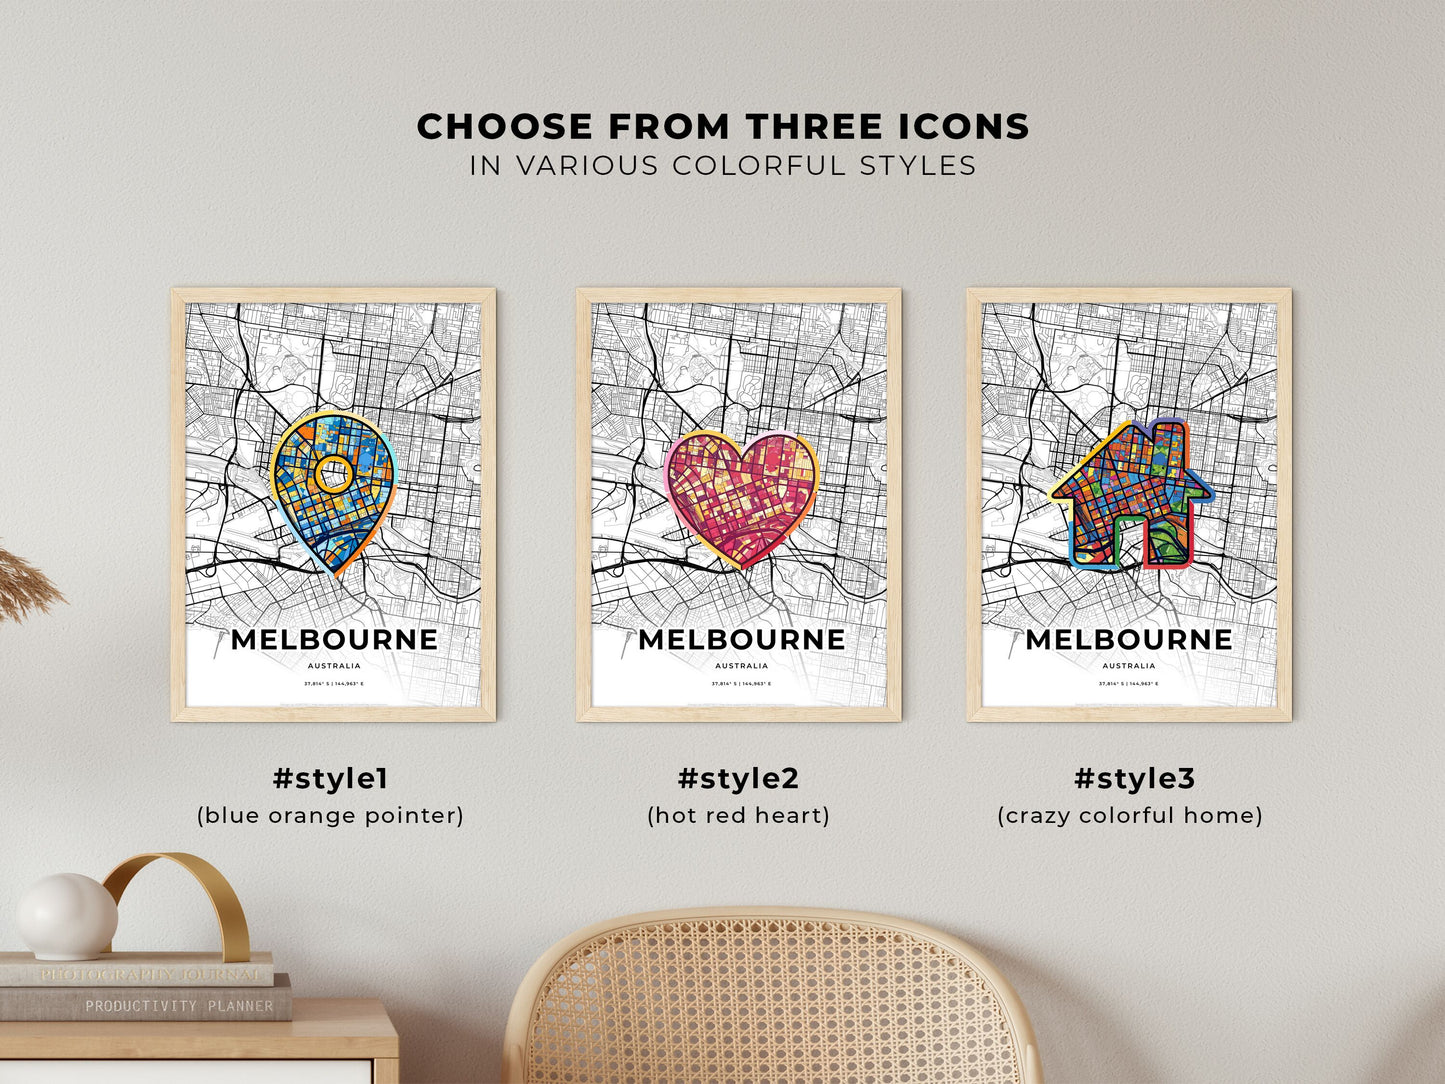 MELBOURNE AUSTRALIA minimal art map with a colorful icon.